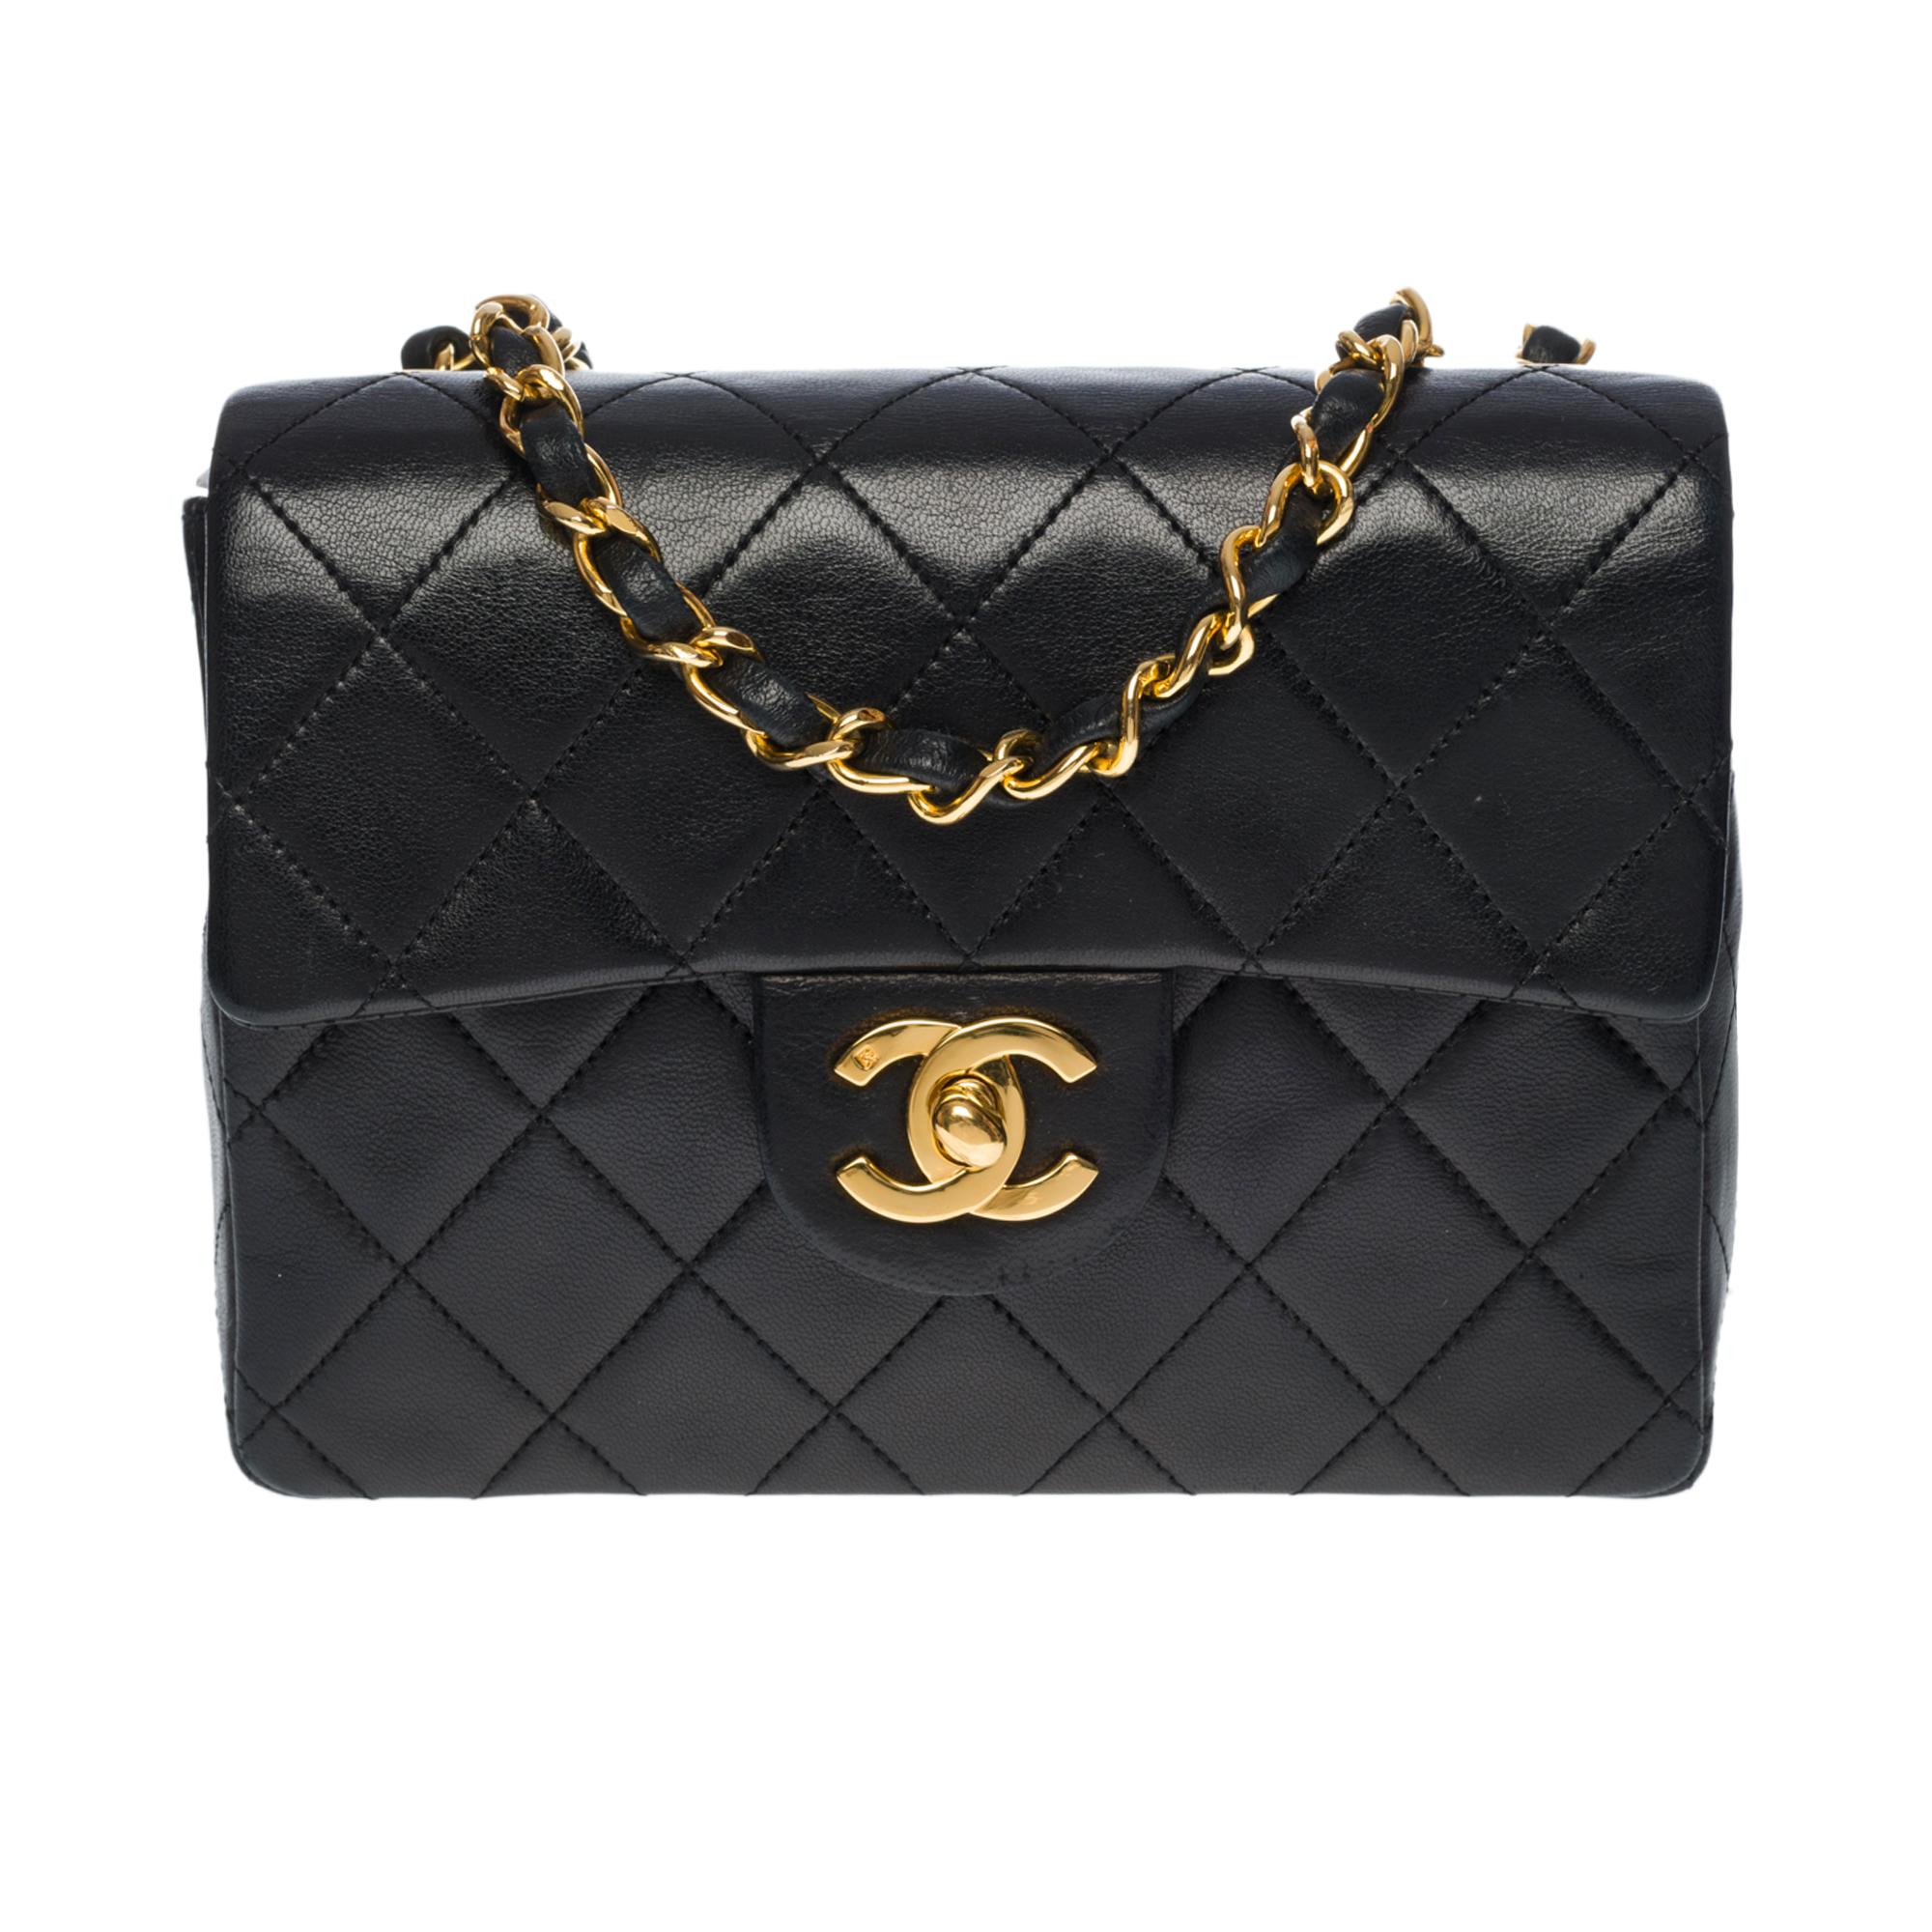 Gorgeous and highly sought after Chanel Timeless/Classic Mini vintage shoulder bag in black quilted leather, gold metal hardware, black leather interlaced gold metal chain for shoulder and shoulder strap support

Gold Metal Flap Closure
A patch